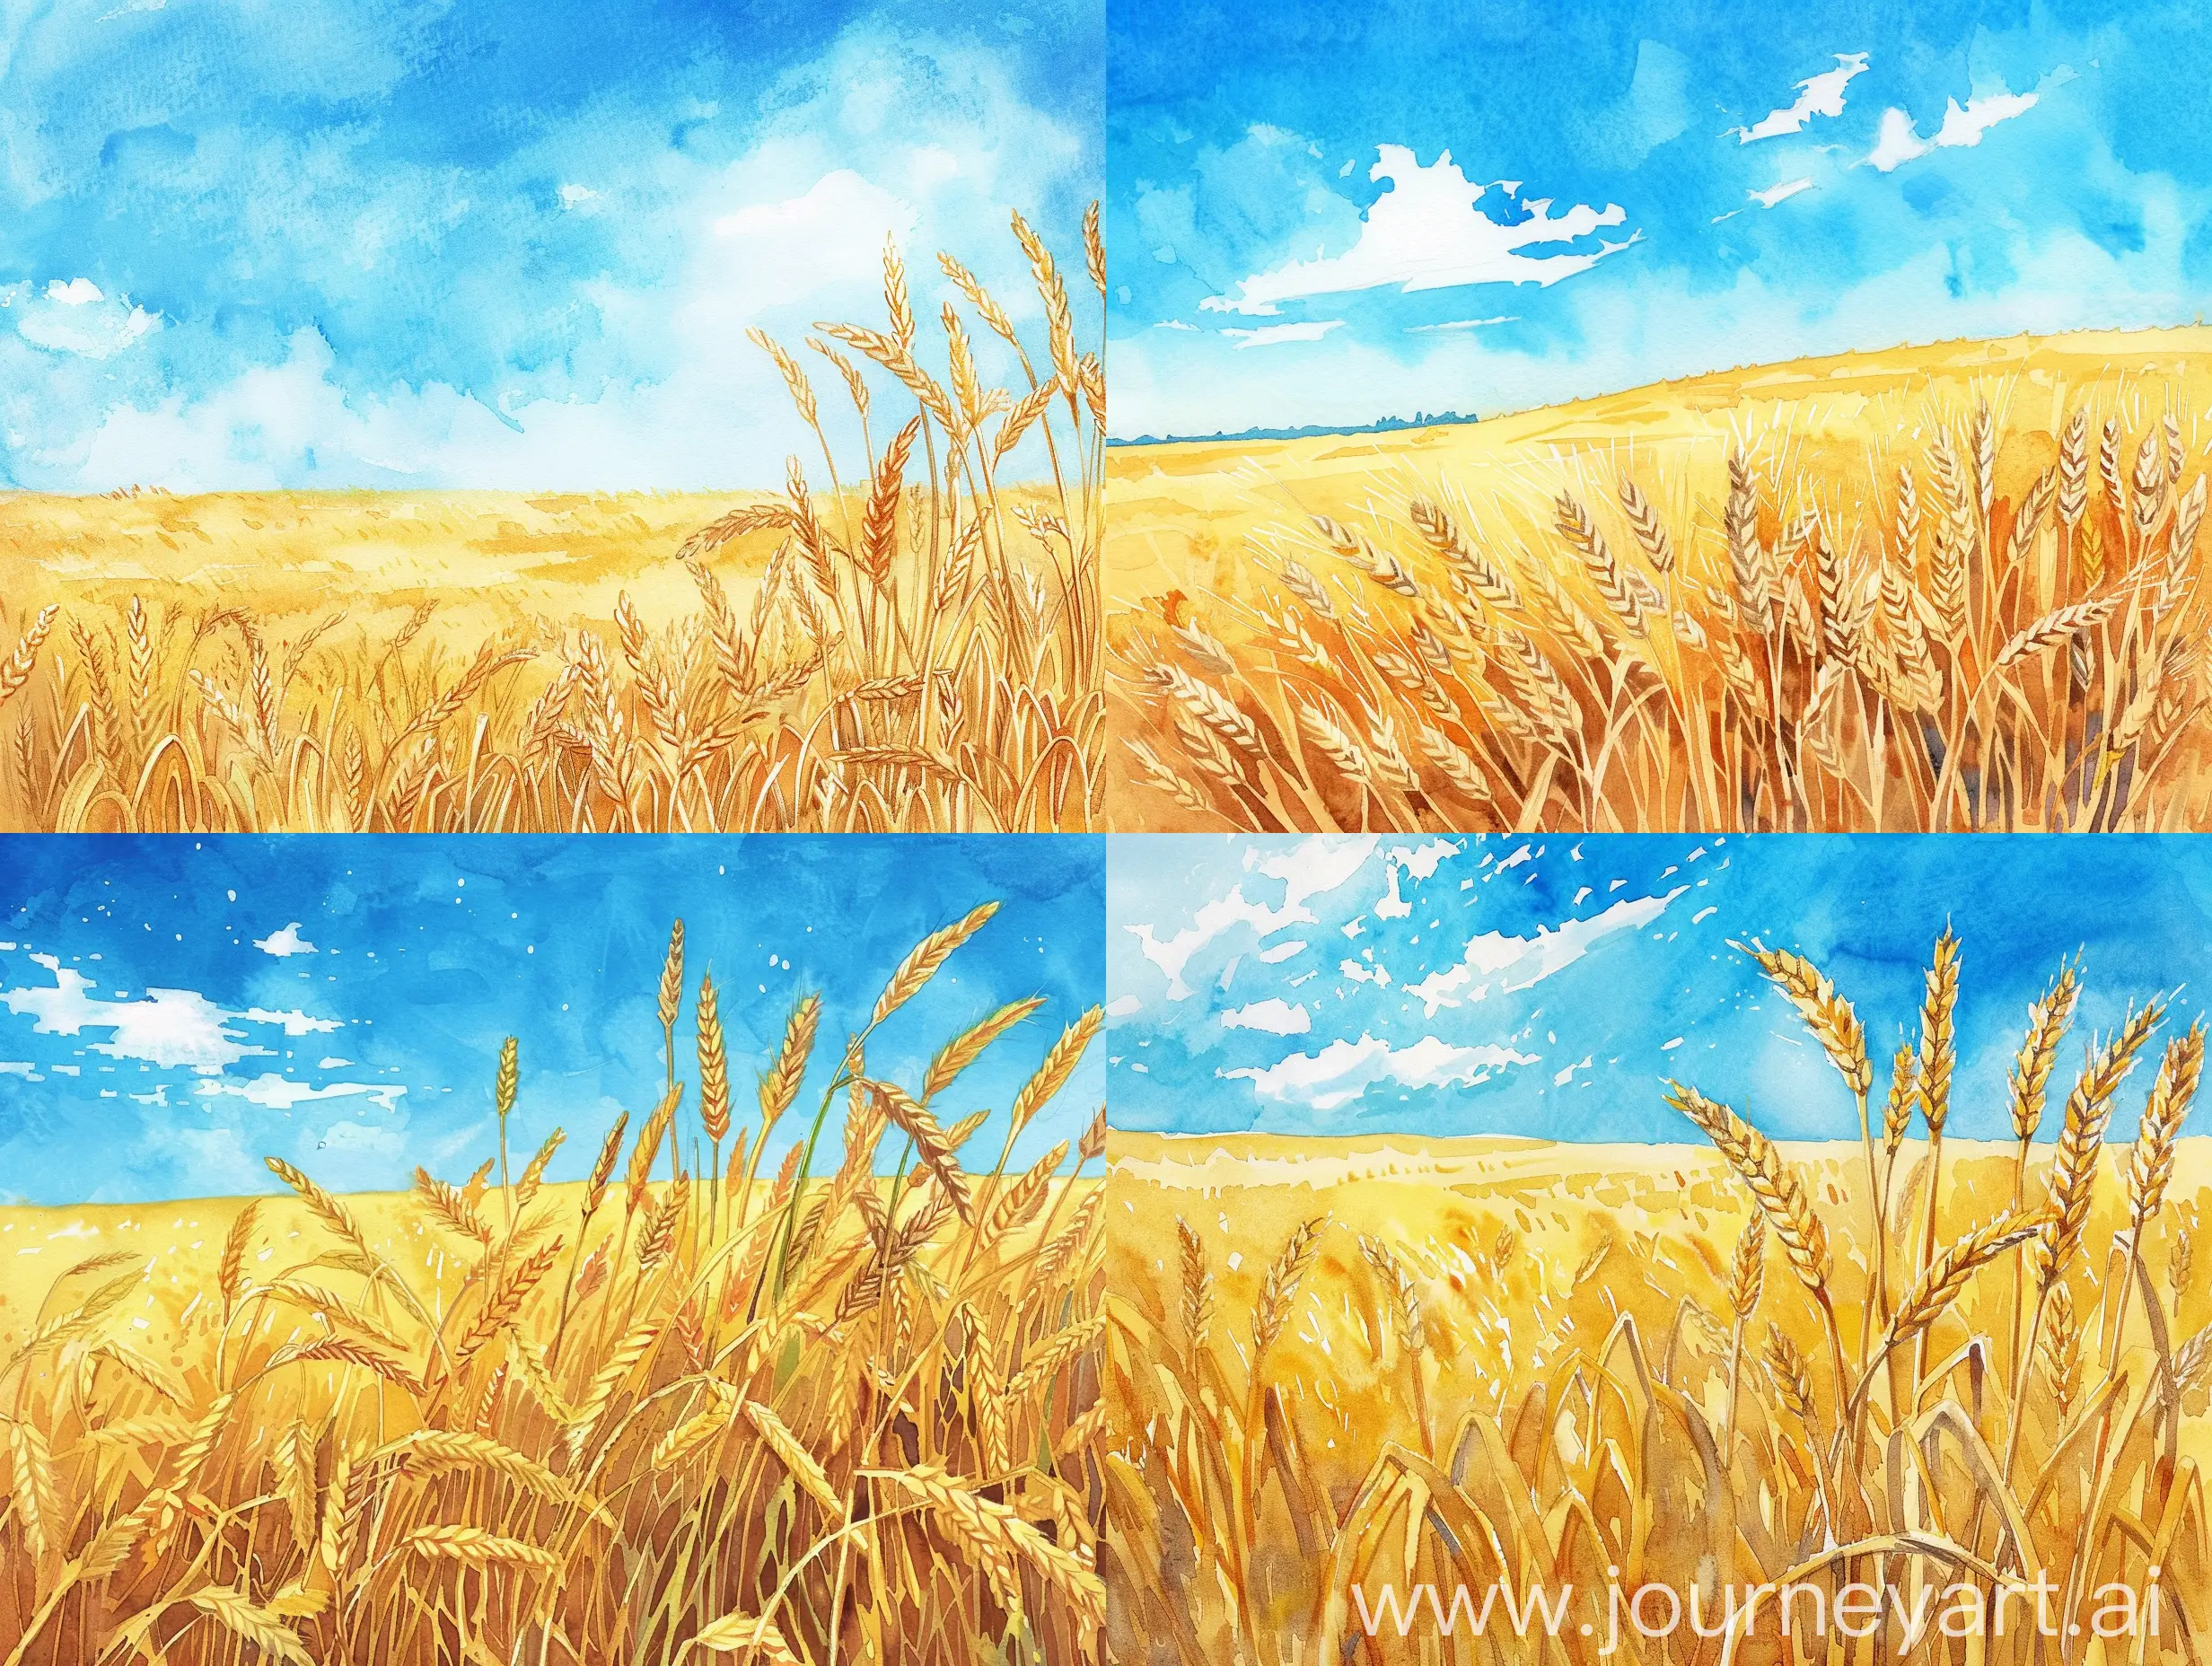 a golden field of wheat waving in the summer breeze, with a bright blue sky and a few clouds dotting the horizon. Style: Watercolor 